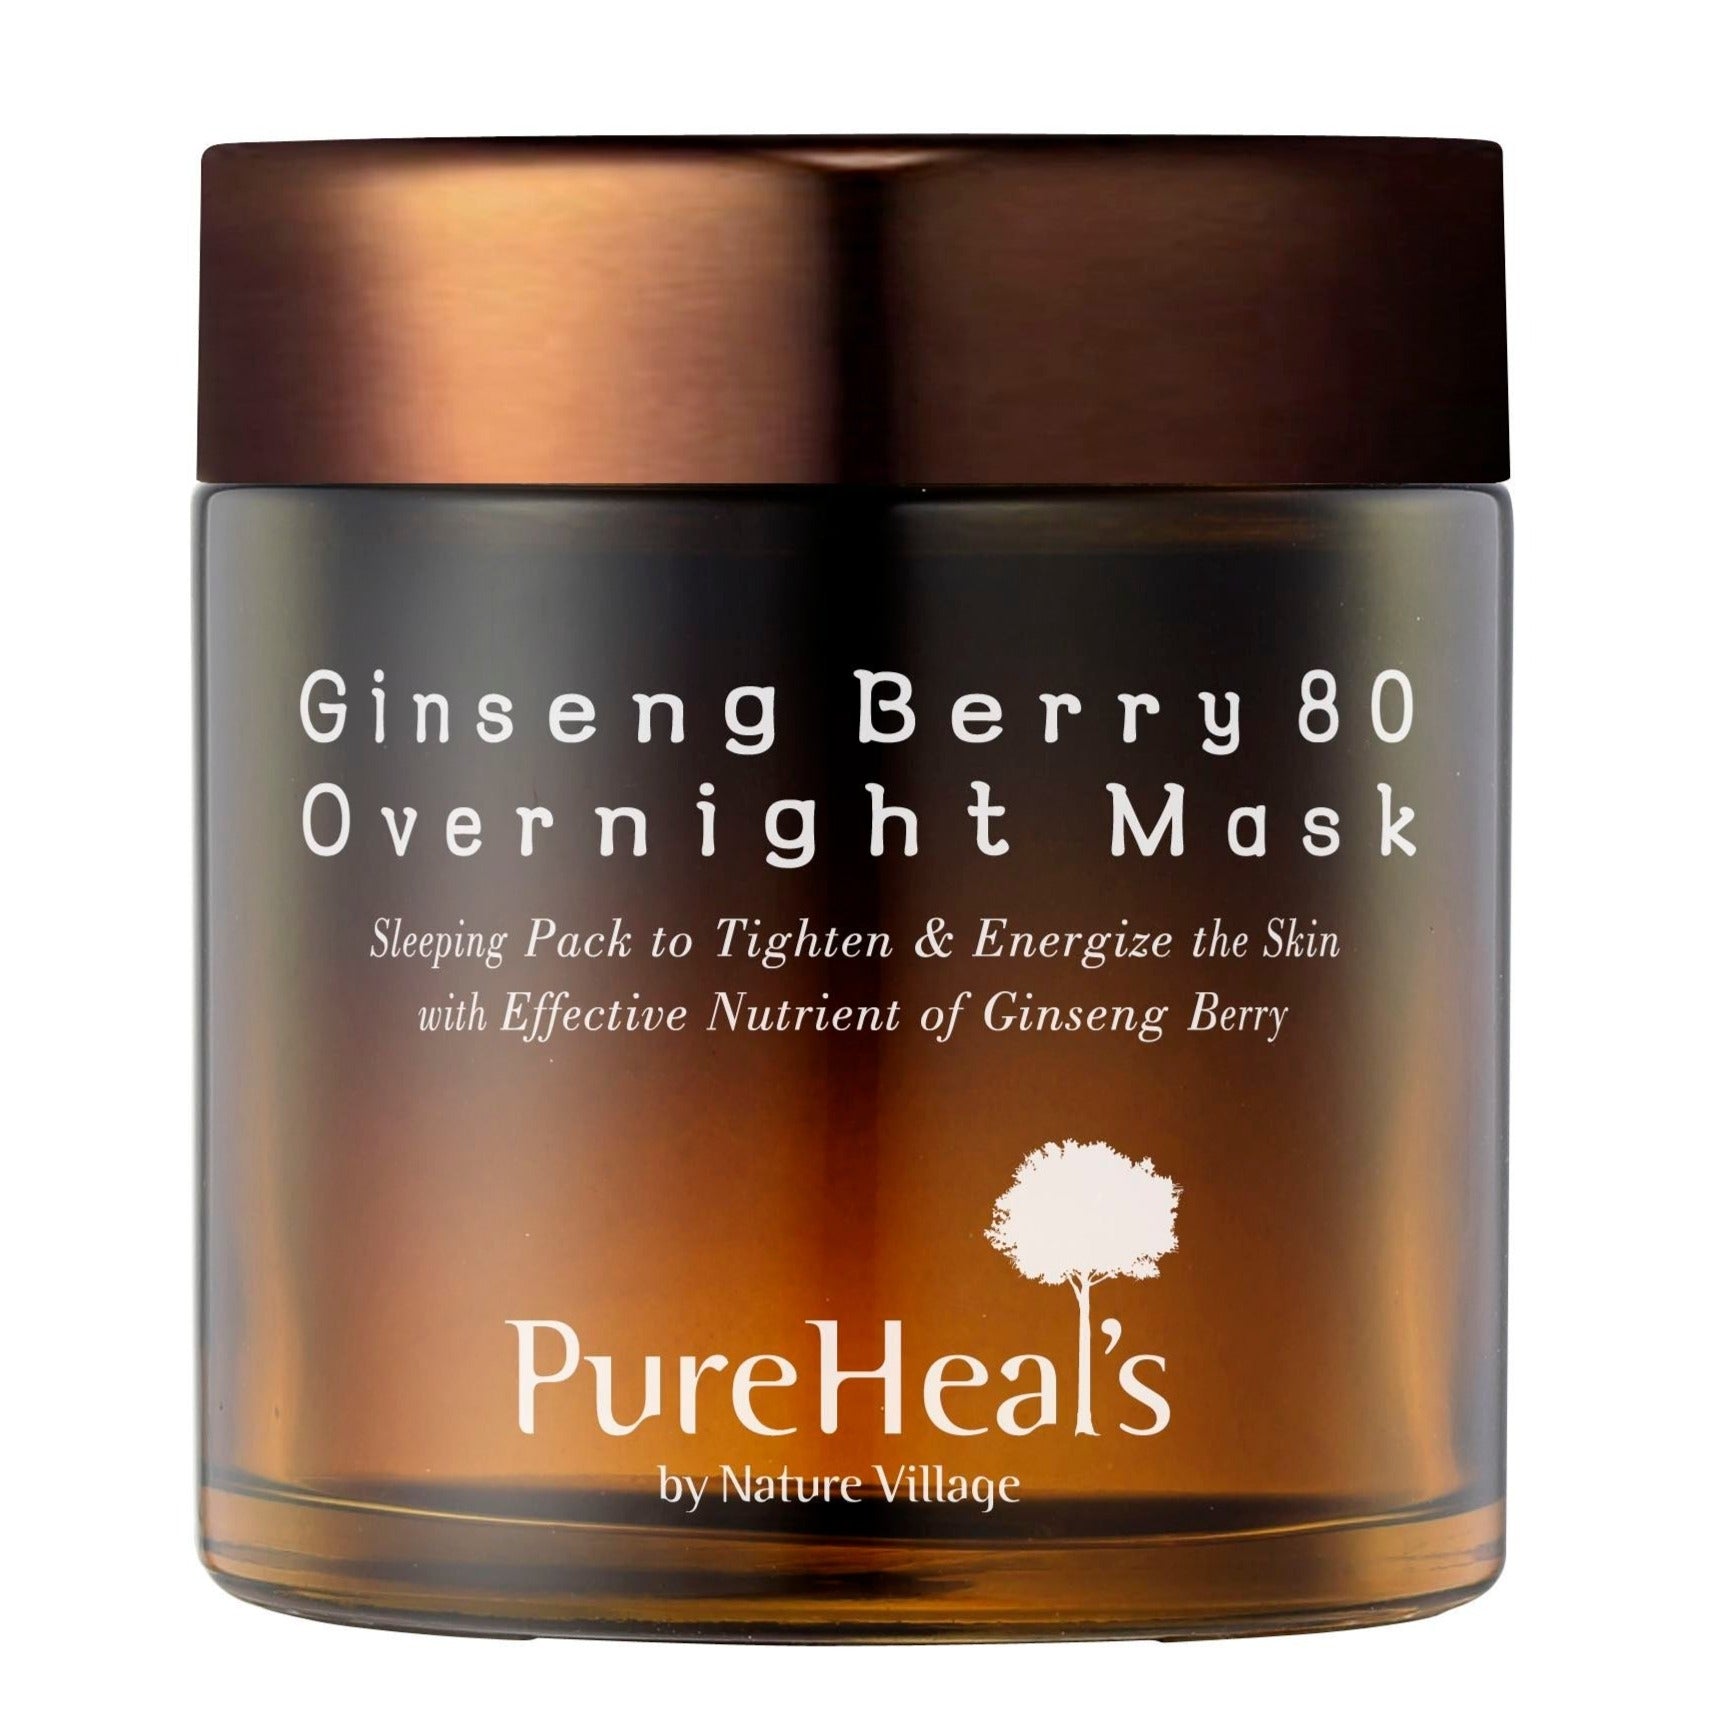 Ginseng Berry 80 Overnight Mask Pure Heal's - 100ml